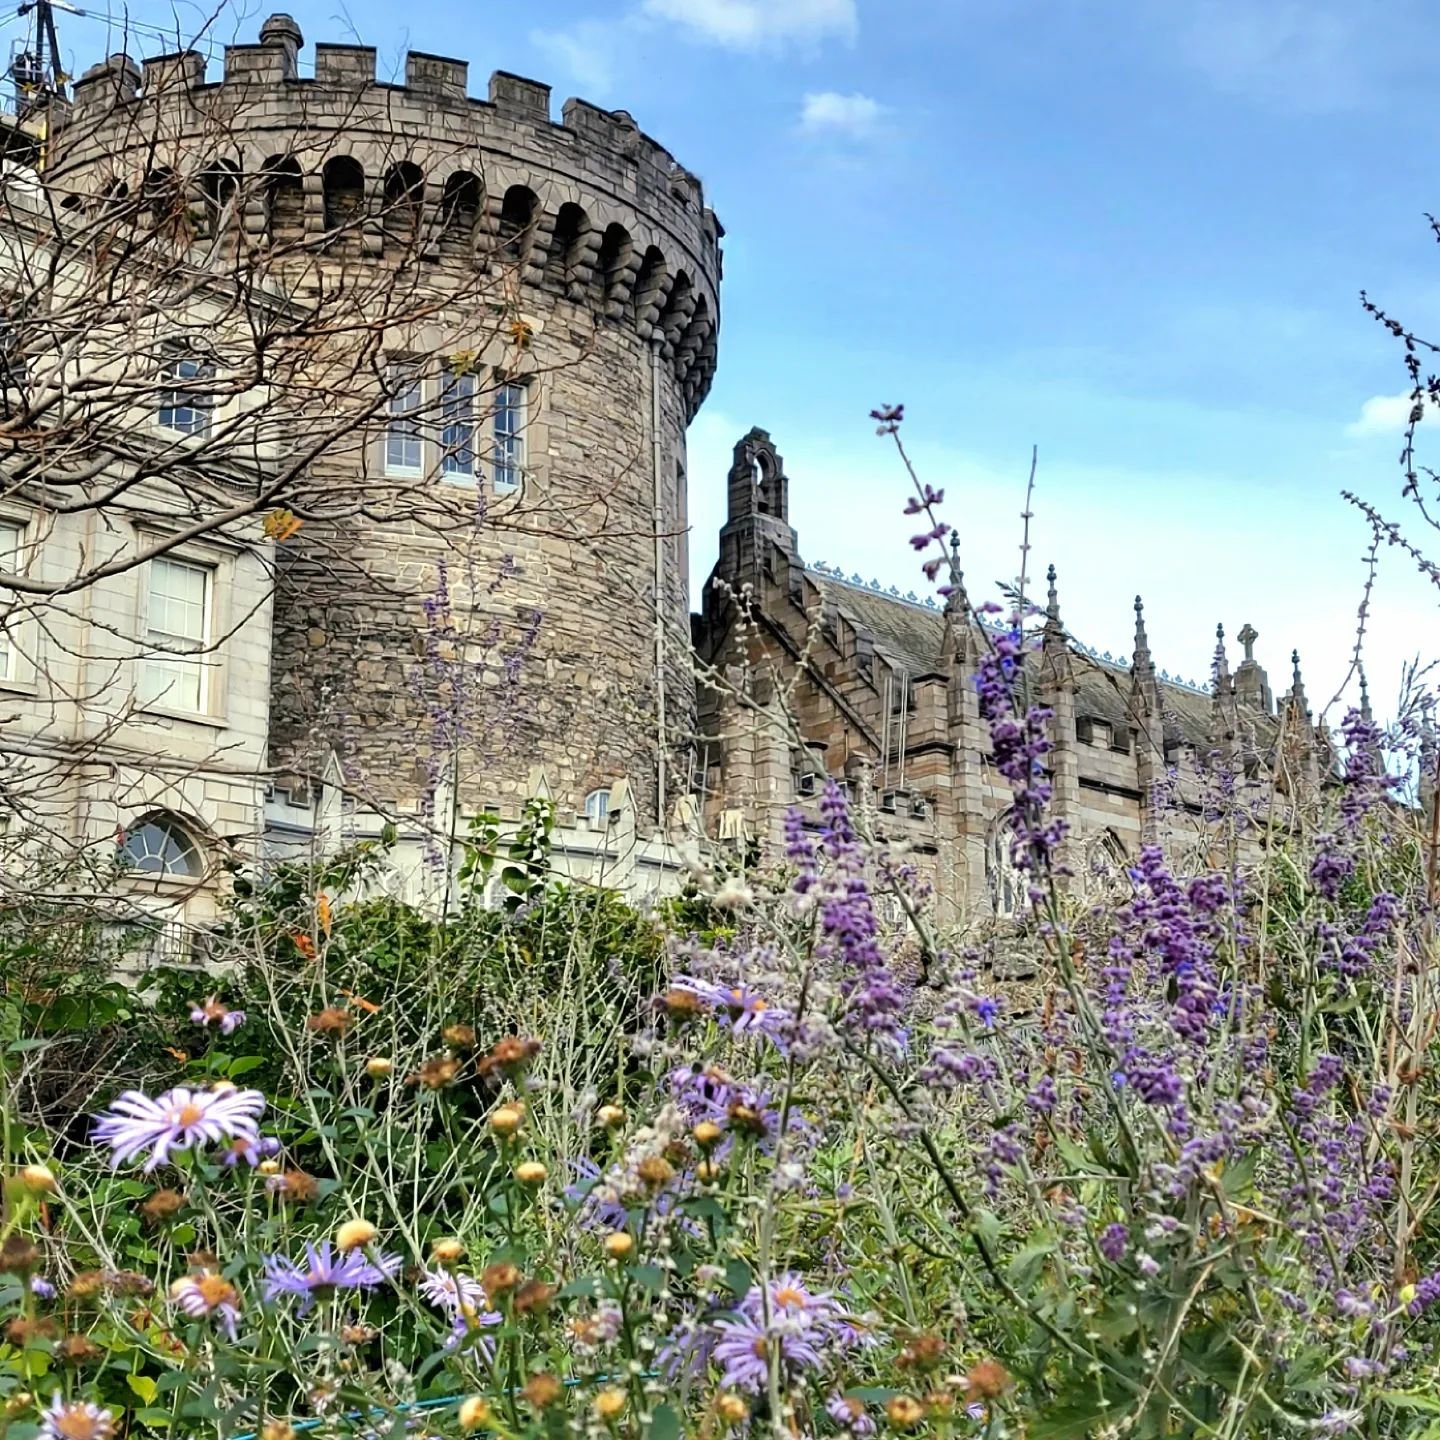 Dublin Castle 🏰 

Some memories from my visit to yet another castle hehe ✨️
The outside of the castle looked super cute with these purple flowers, although the other side of it is being renewed and you can see some construction.
The inside was full 